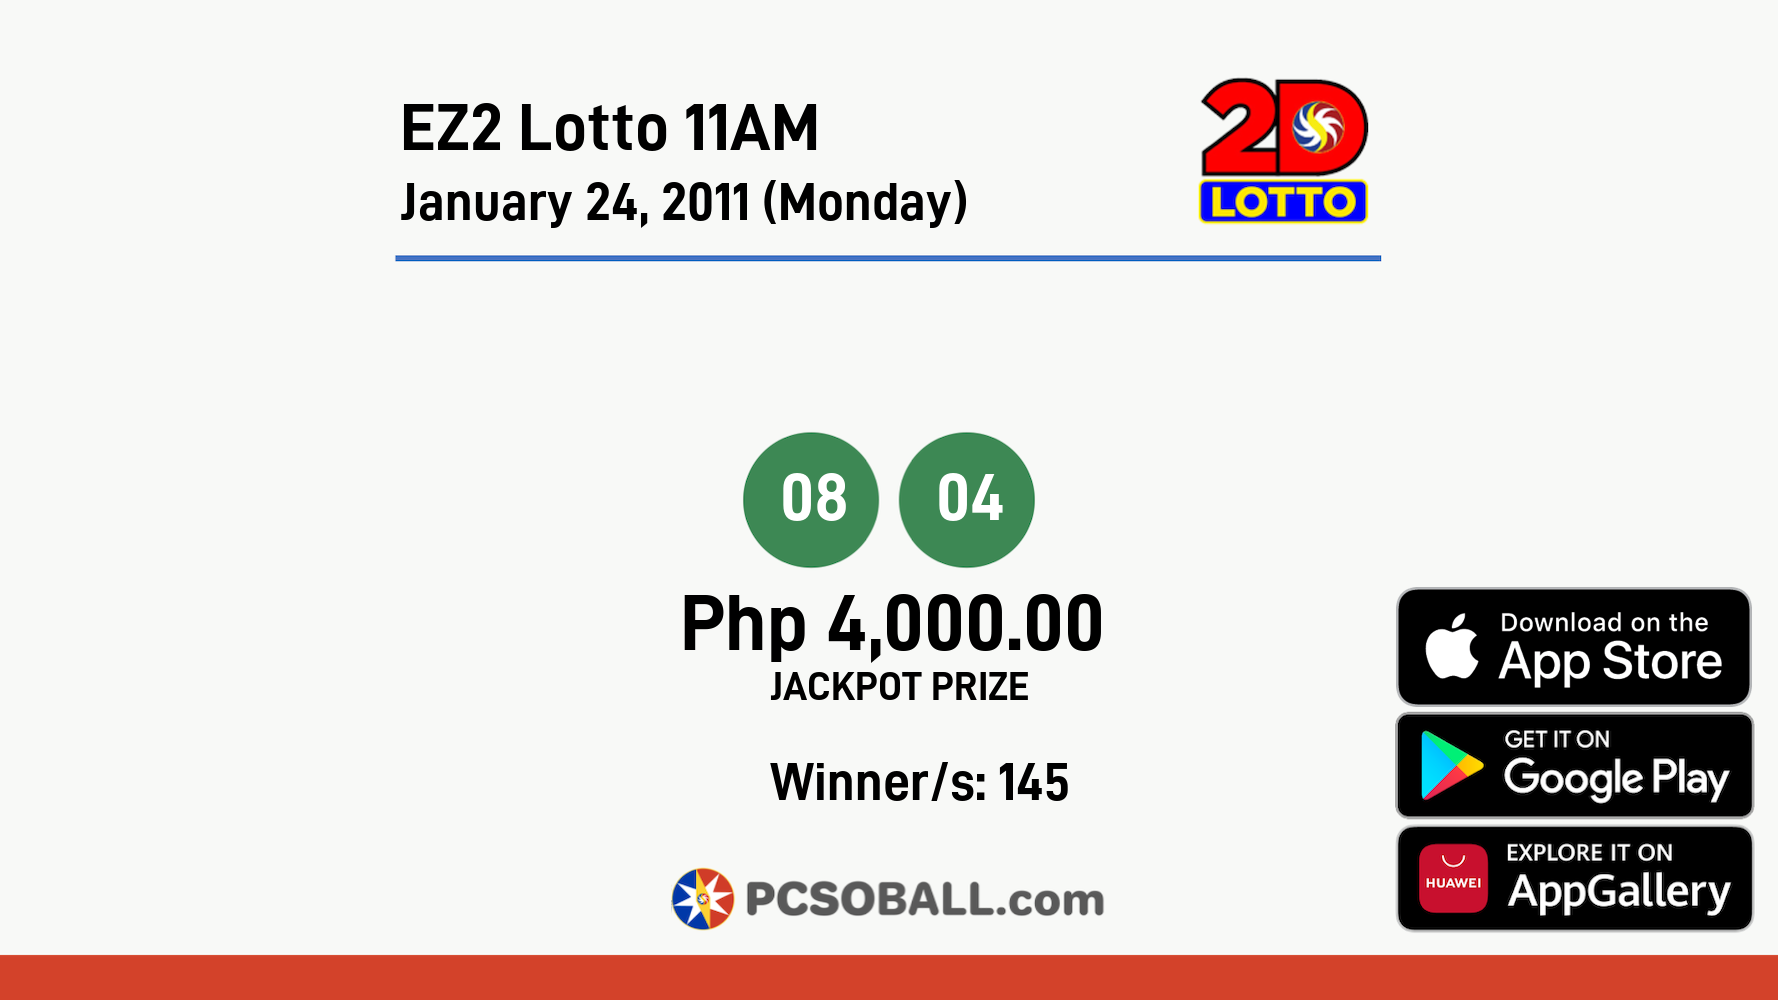 EZ2 Lotto 11AM January 24, 2011 (Monday) Result